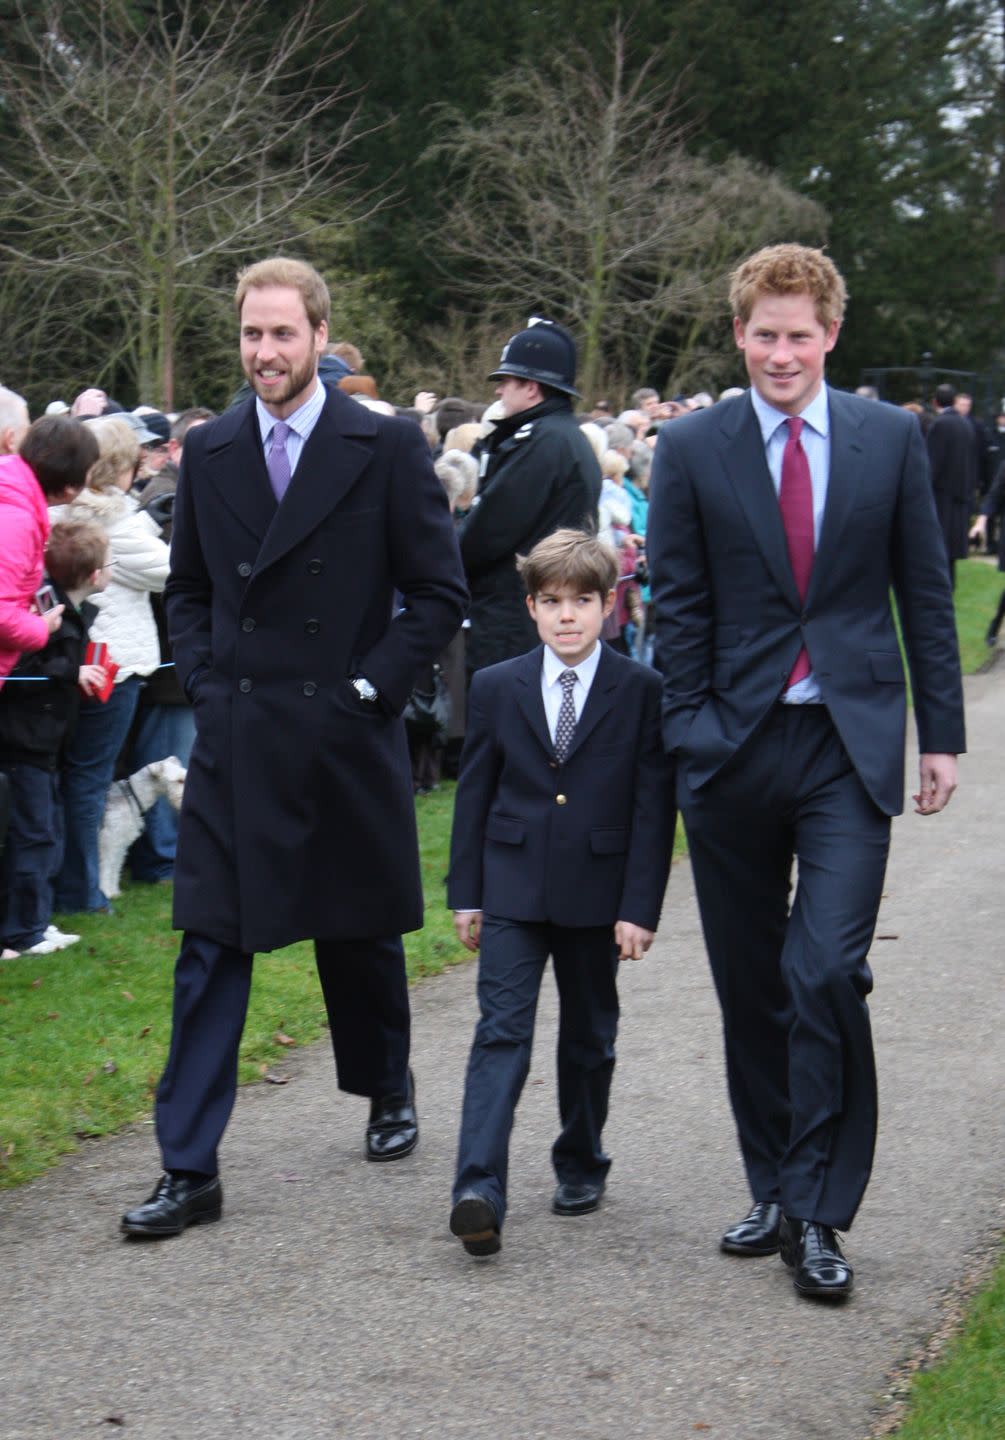 members of the royal family inclusing prince william, arthur chatto and prince harry, attend the morning service on christmas day at sandringham church photo by justin goff\uk press via getty images